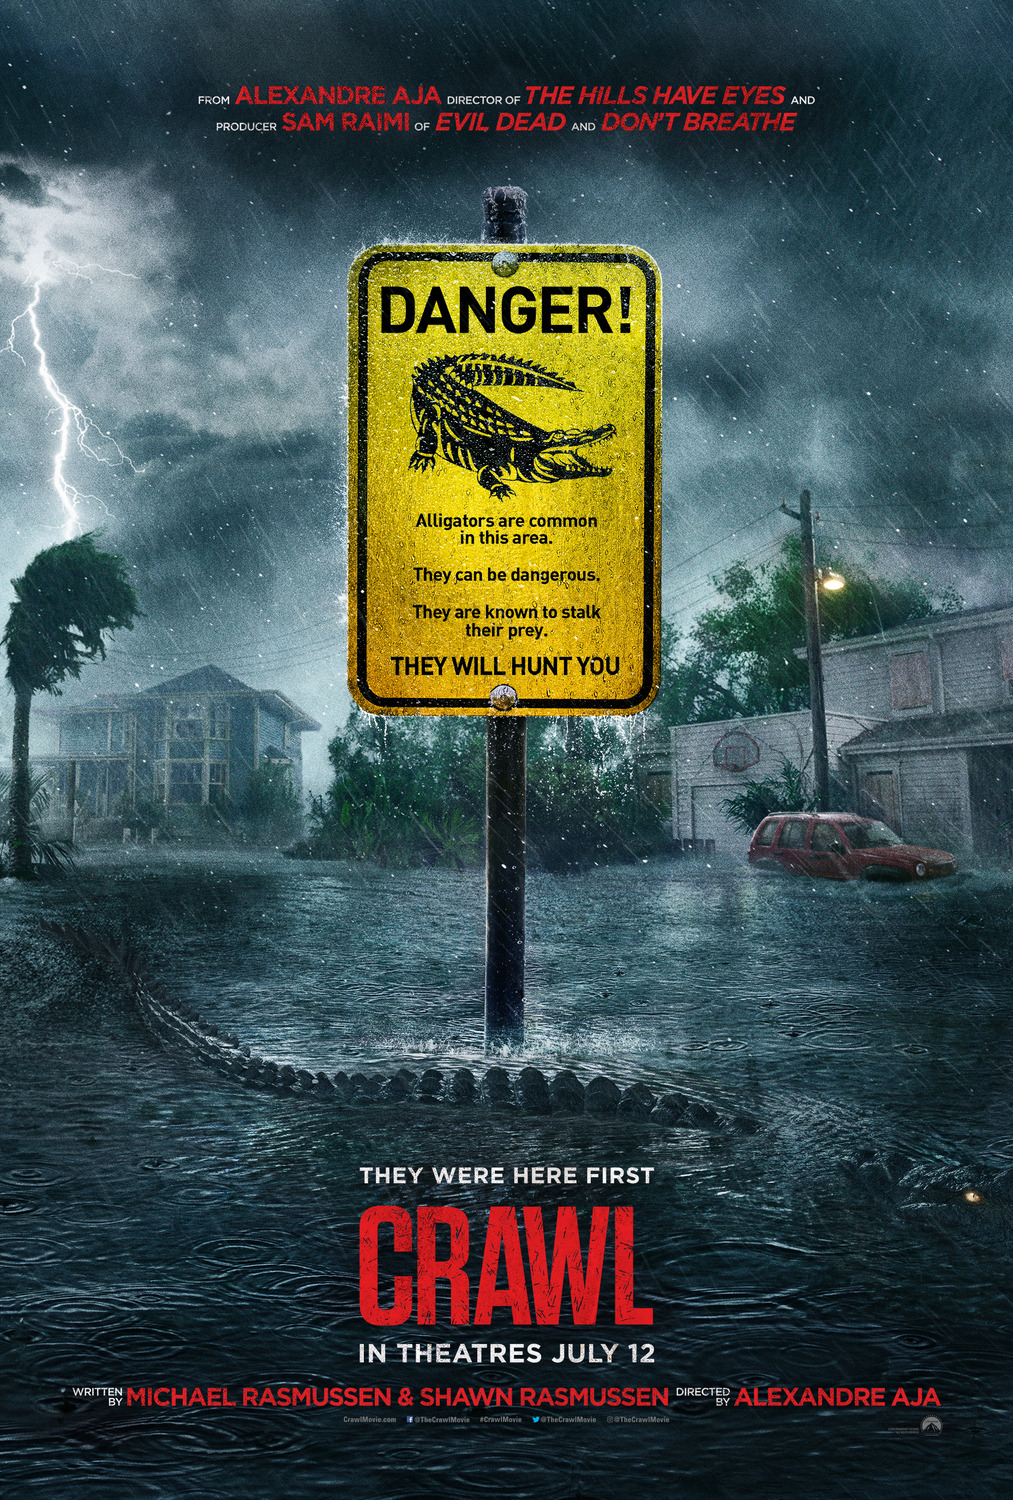 Crawl film review: a good time with gators